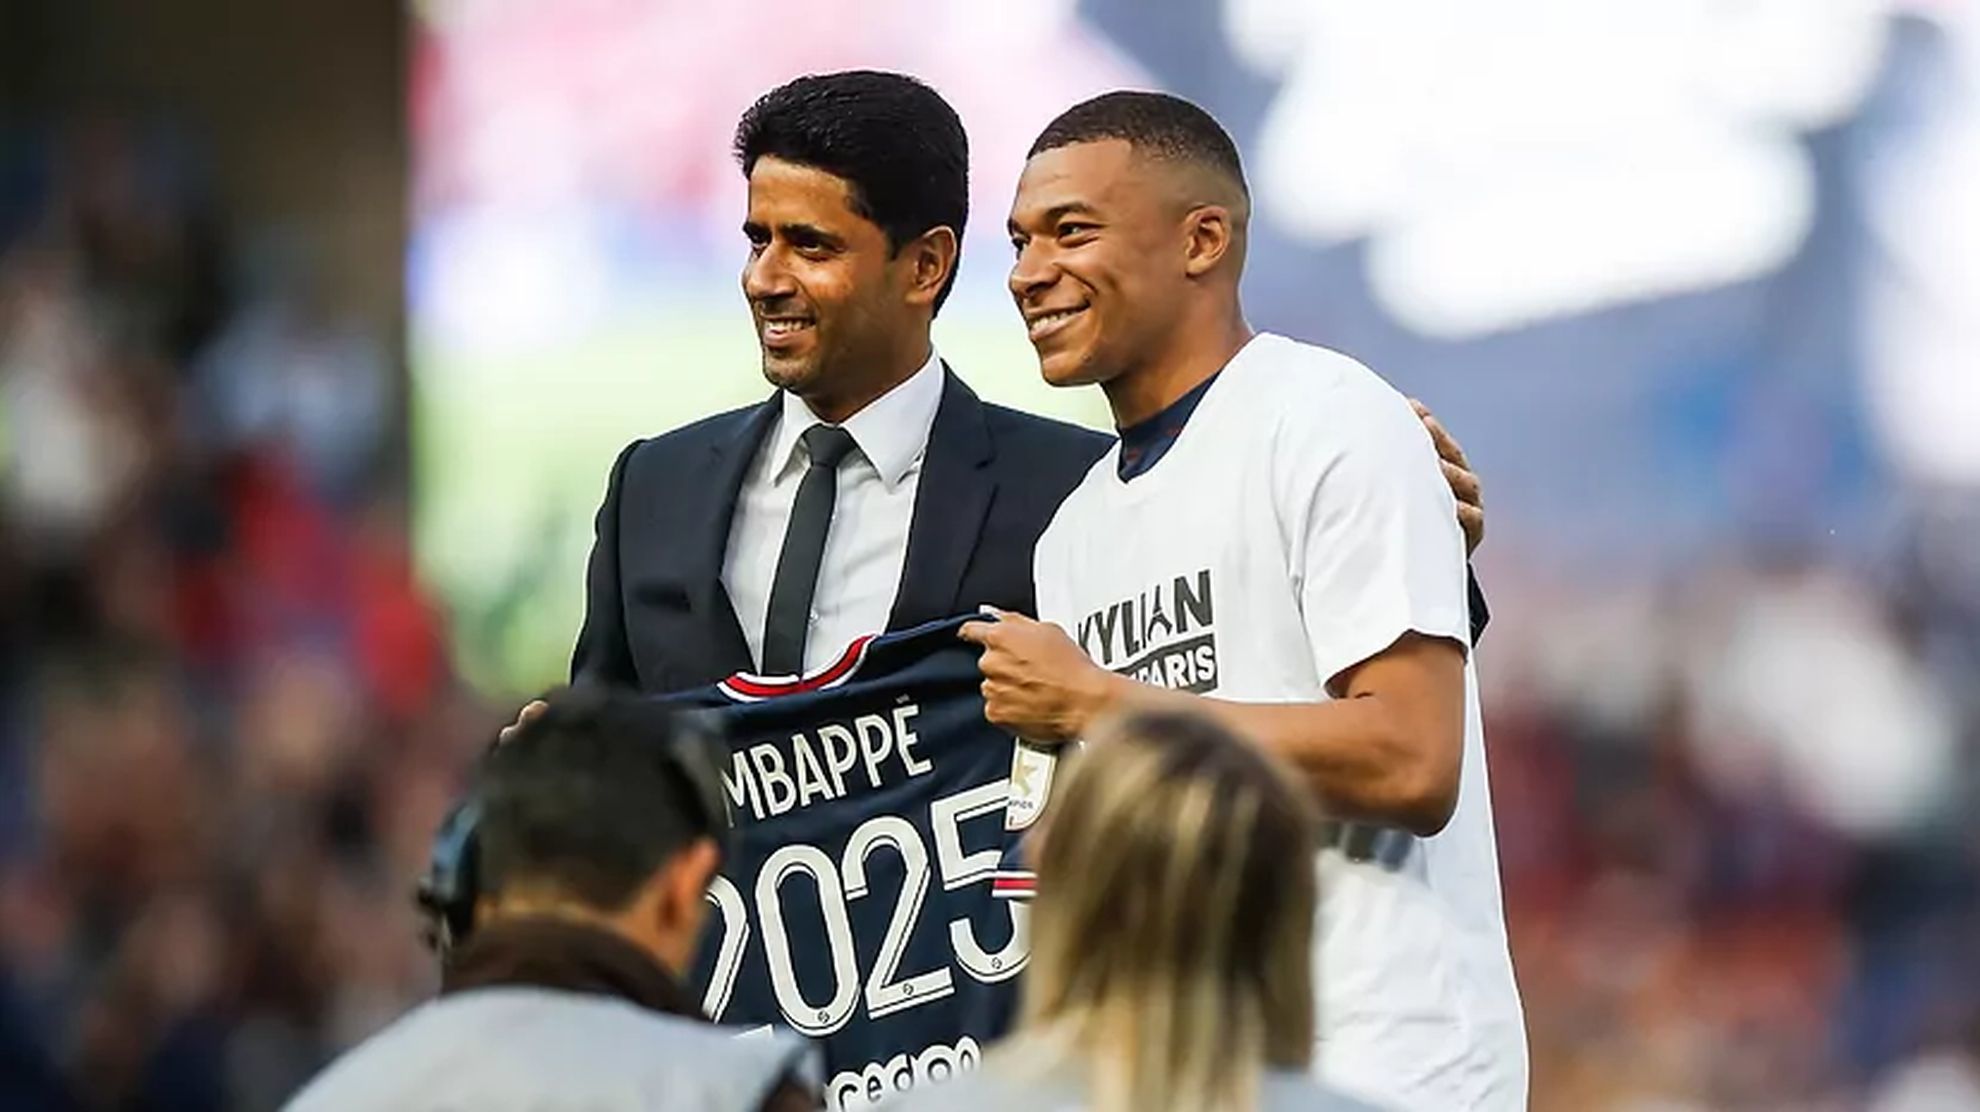 Mbappe and Al-Khelaifi press conference LIVE: He'll speak about turning down Real Madrid